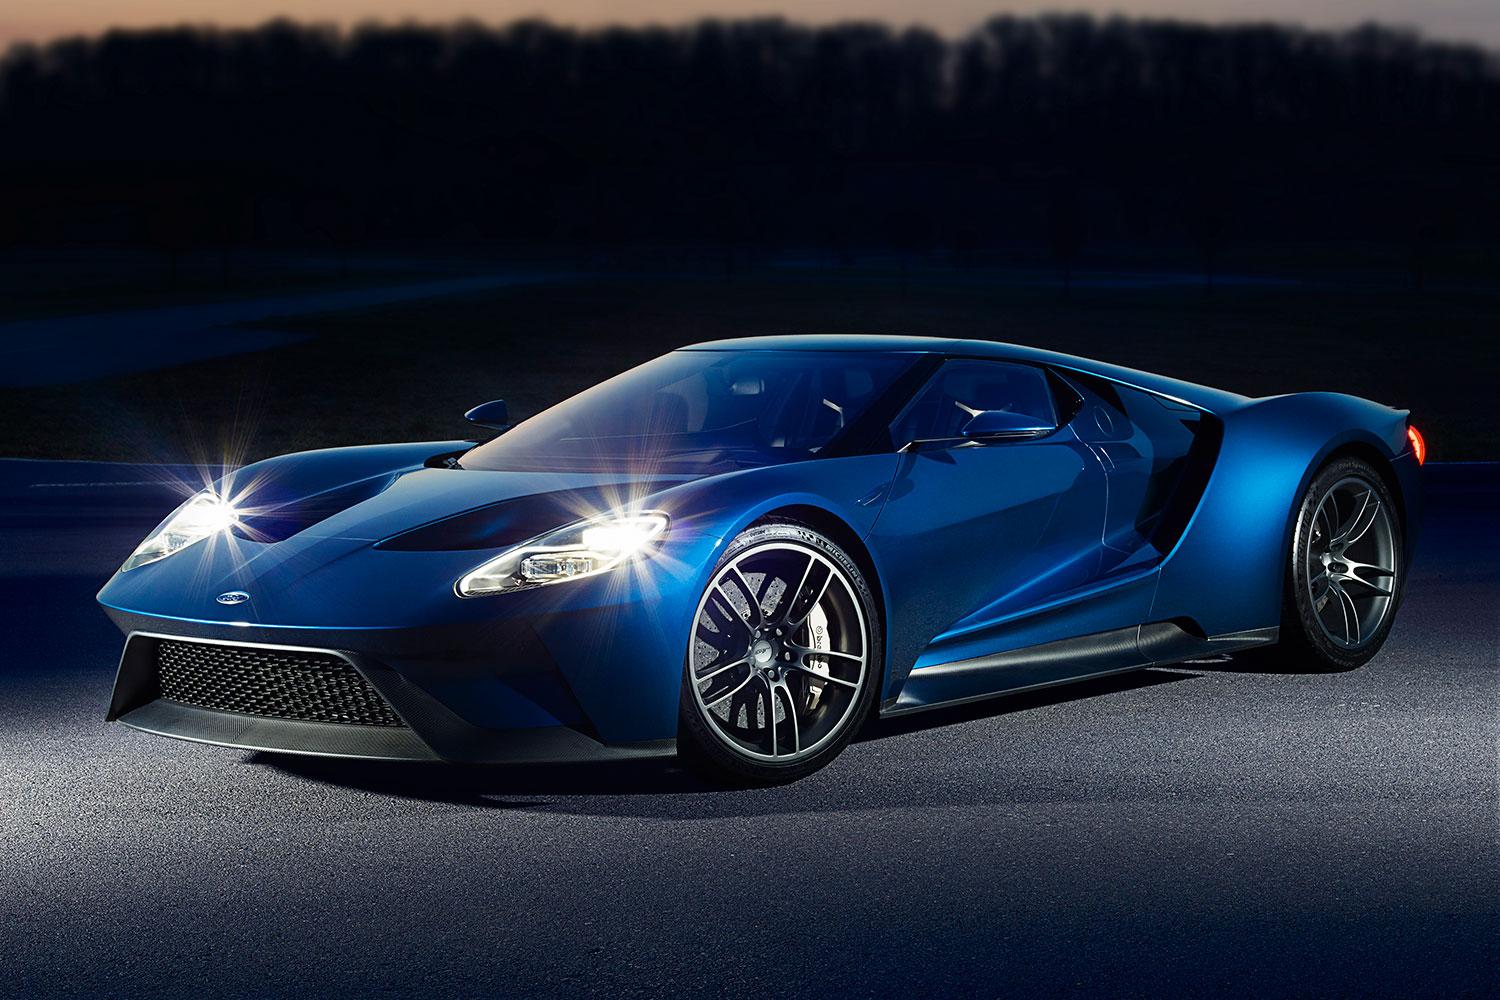 meet the man who sculpted softer side of fords hardcore 2016 gt all newfordgt 08